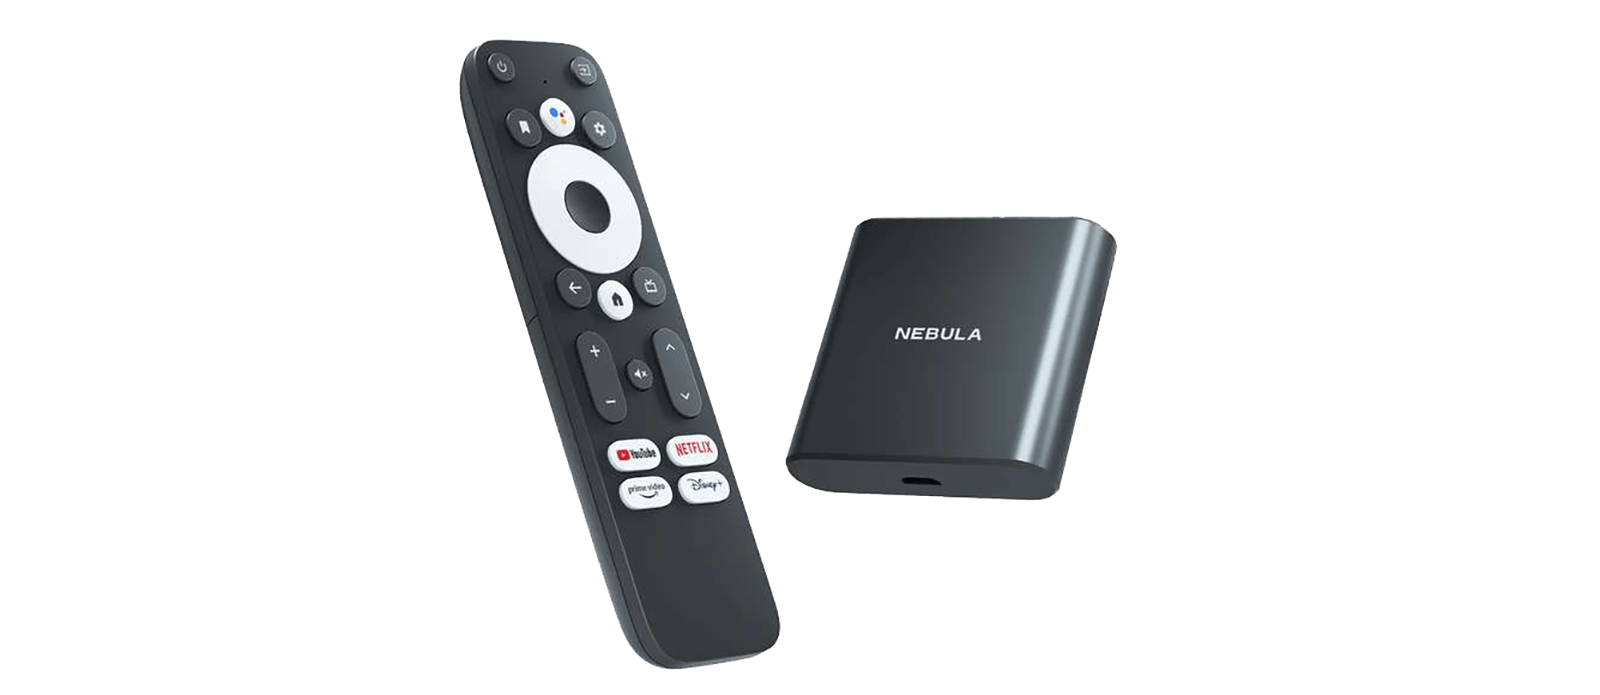 An image of Anker's upcoming streaming device